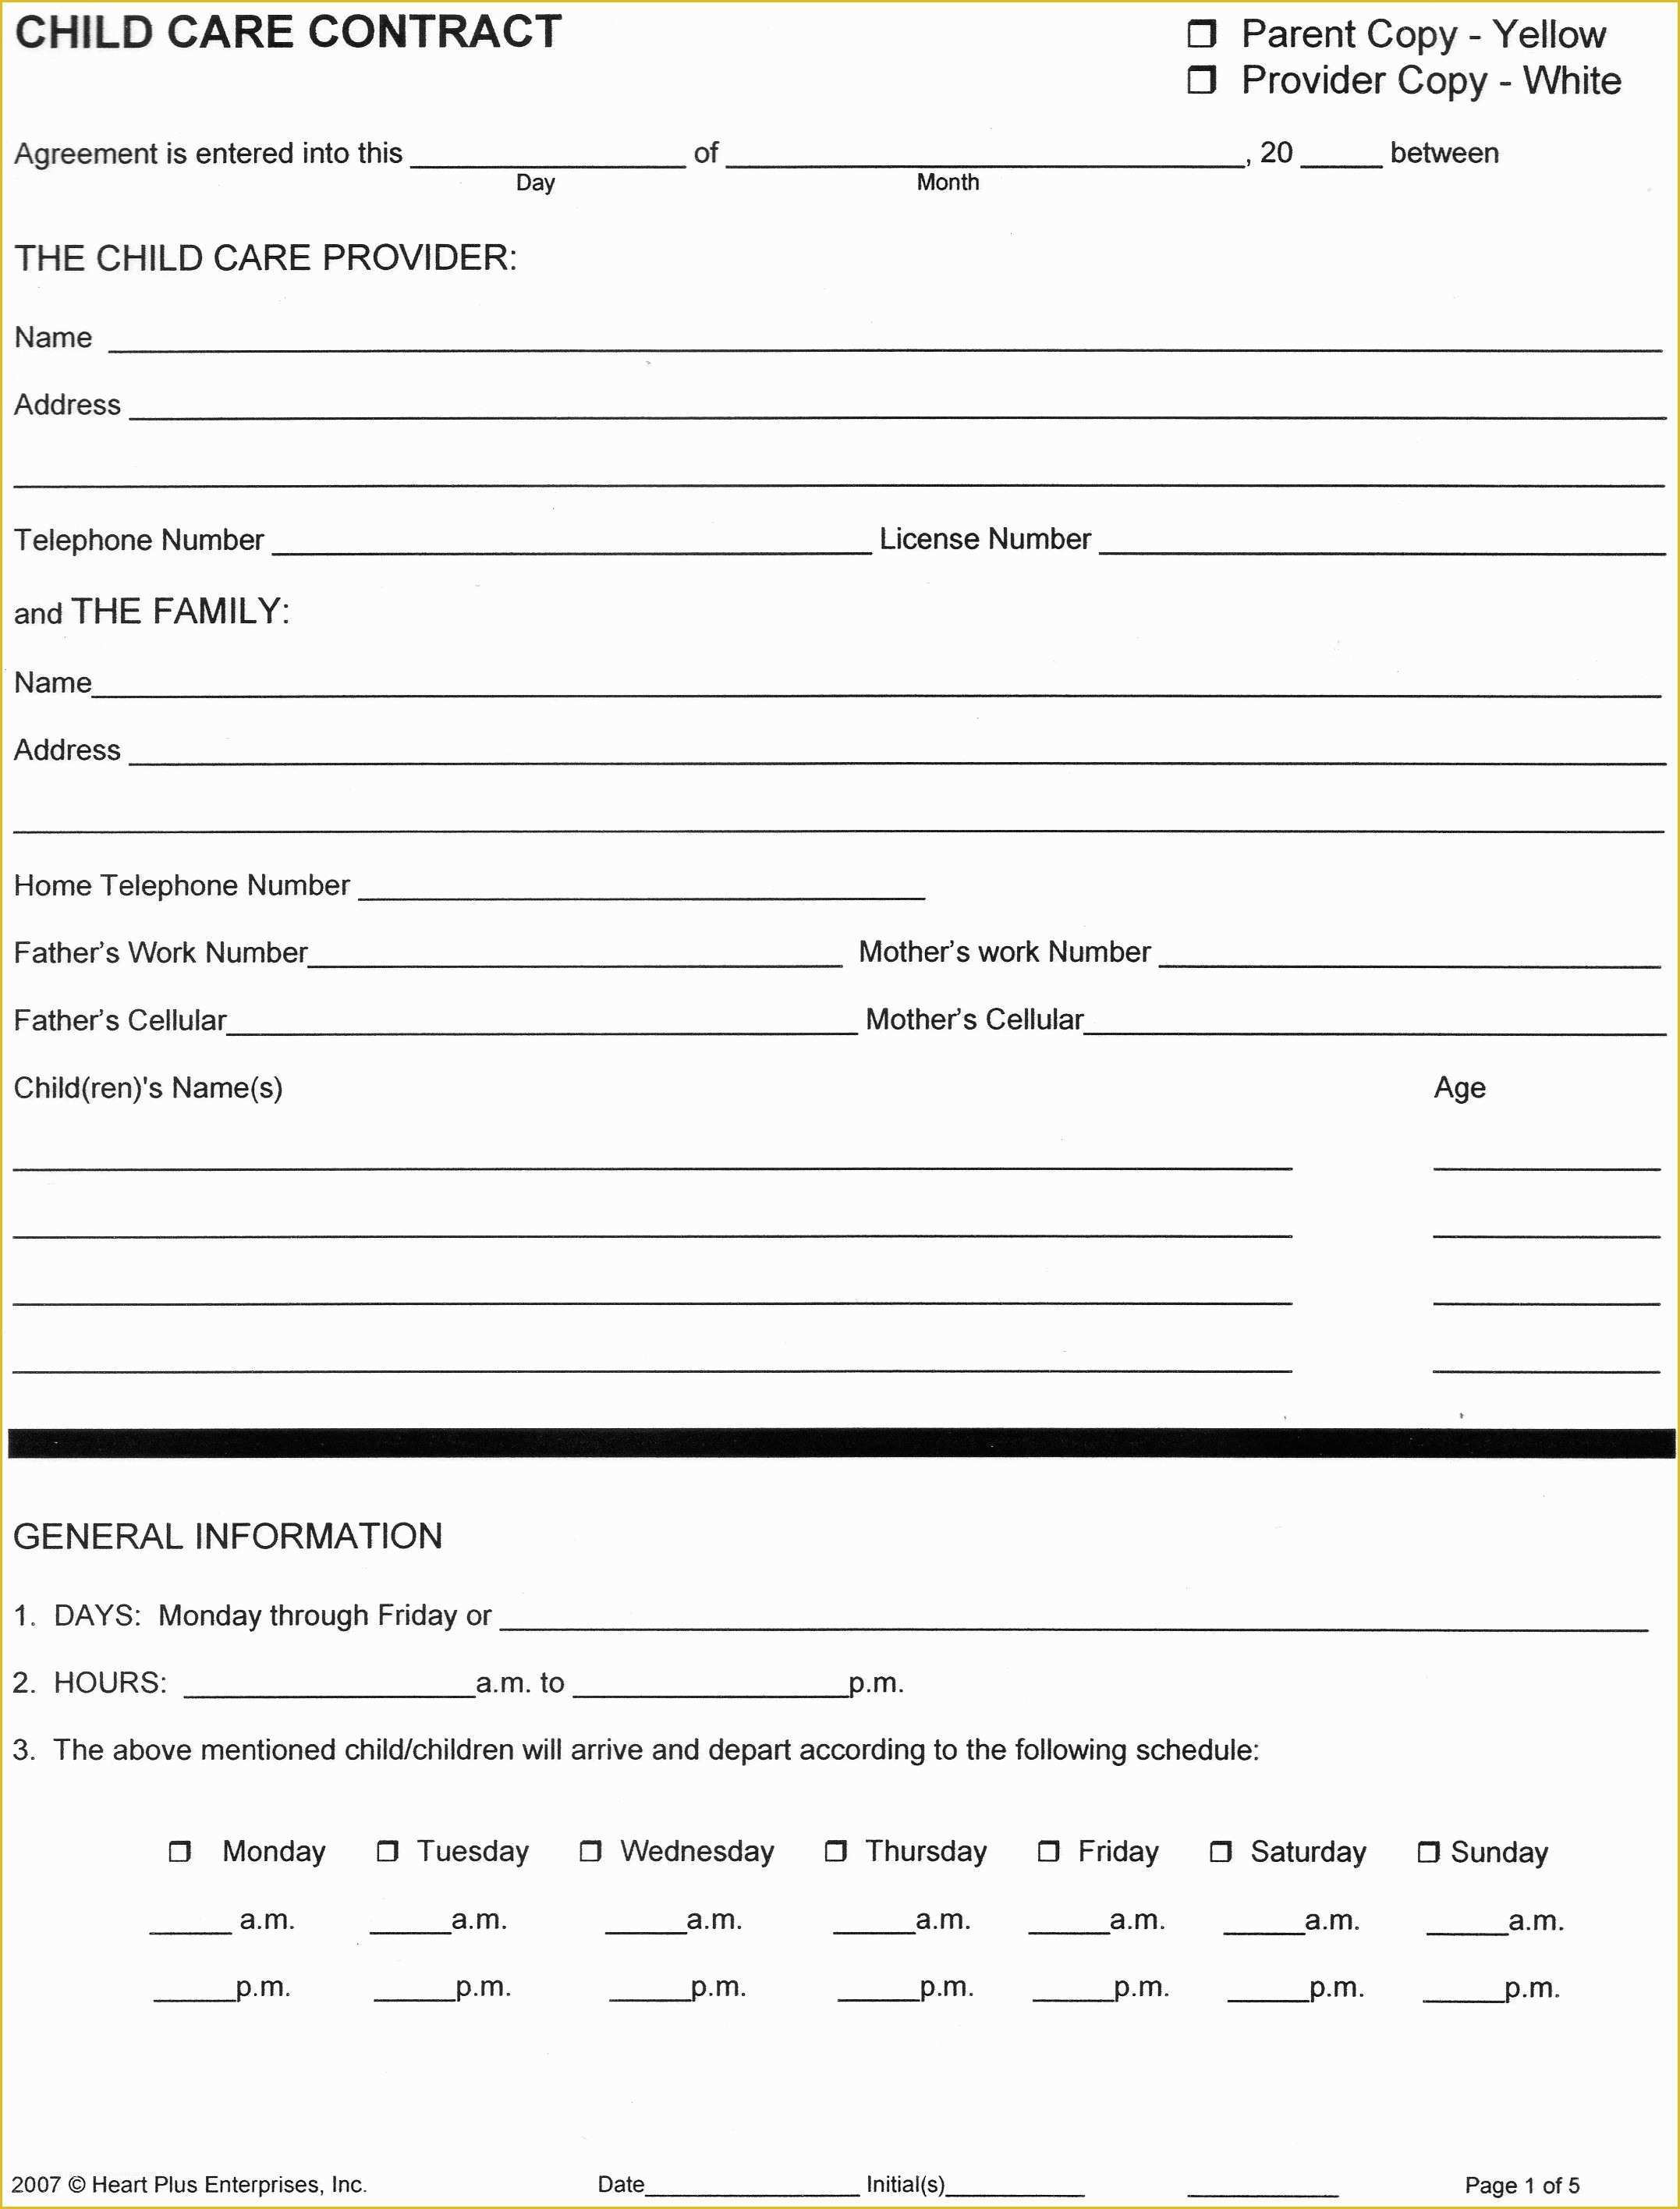 Child Care Contract Template Free Of Home Child Care forms Child Care Contract 1